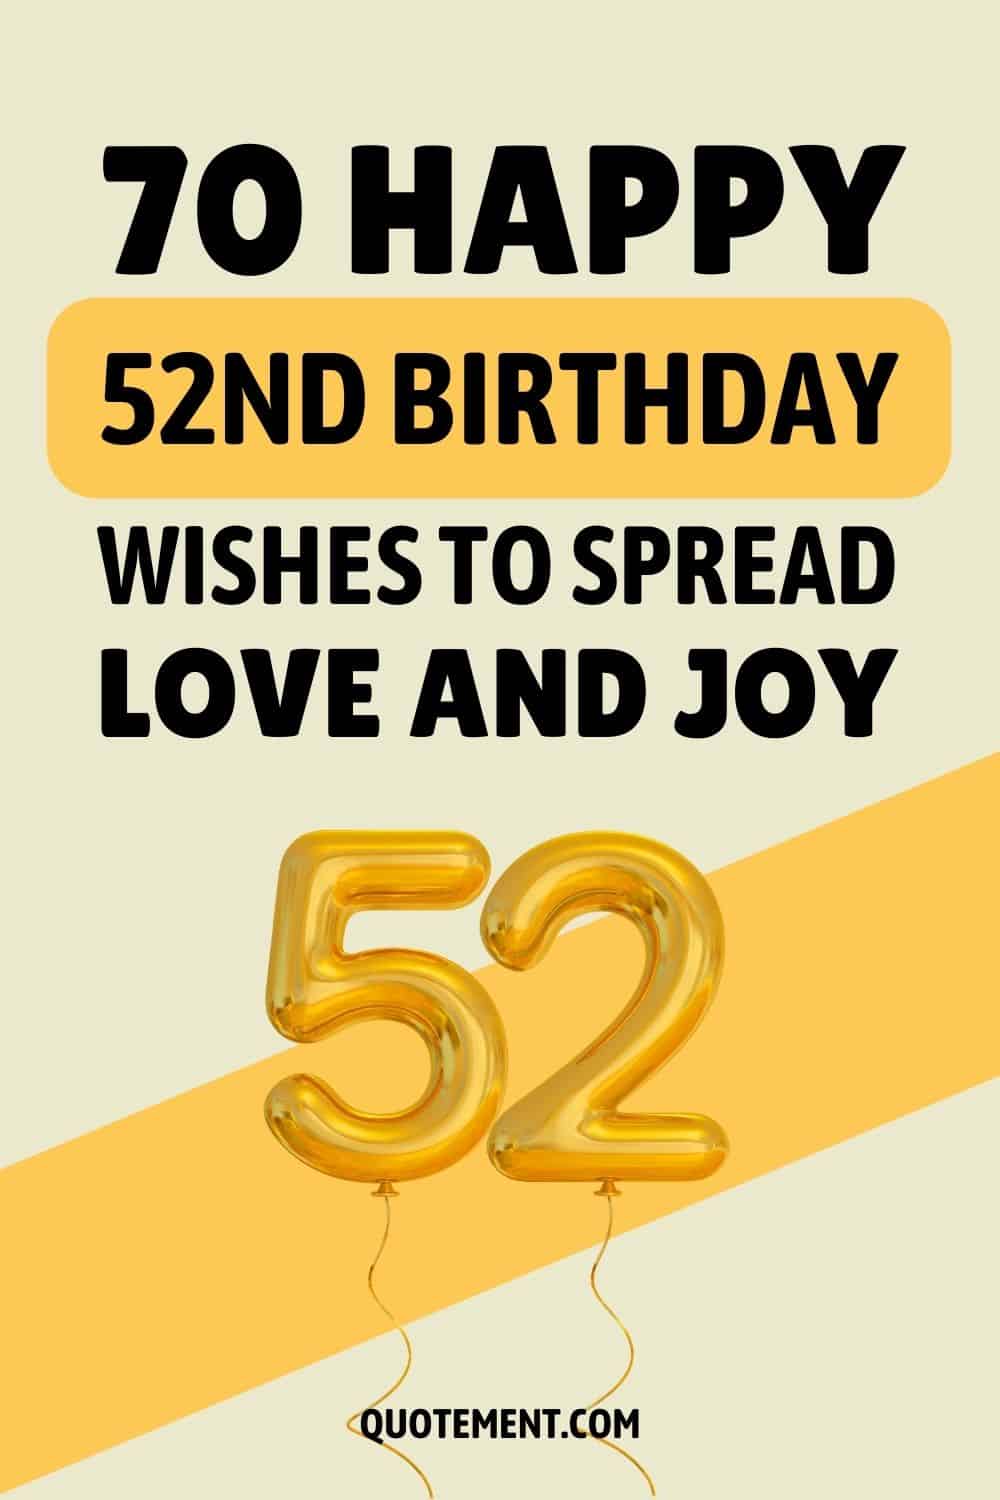 70 Happy 52nd Birthday Wishes To Spread Love And Joy
